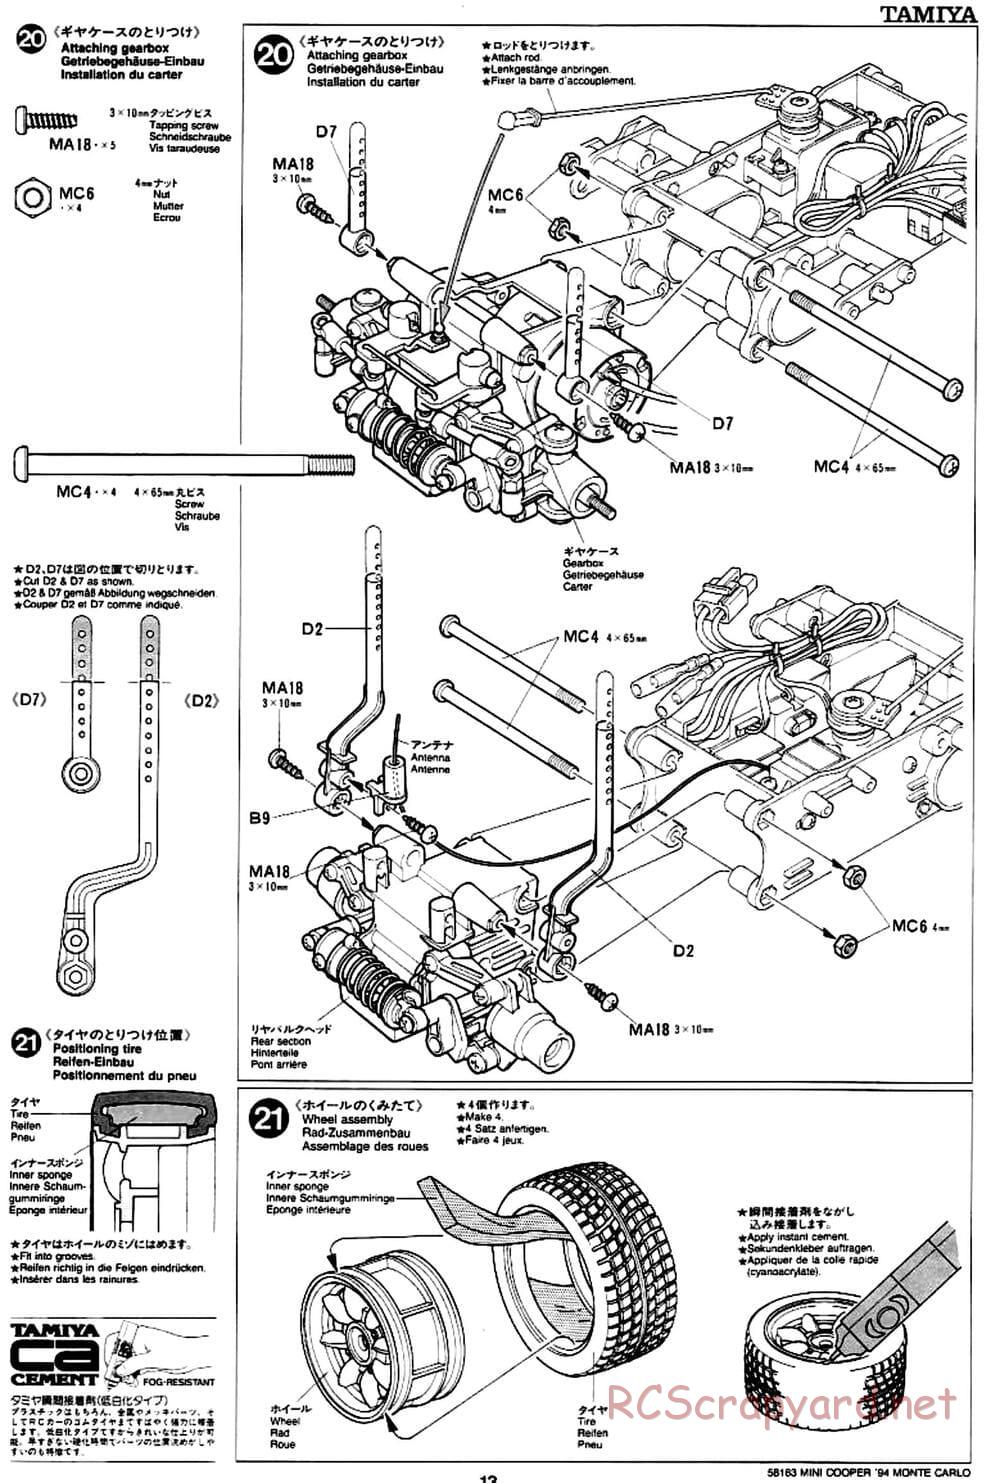 Tamiya - Rover Mini Cooper 94 Monte-Carlo - M01 Chassis - Manual - Page 13